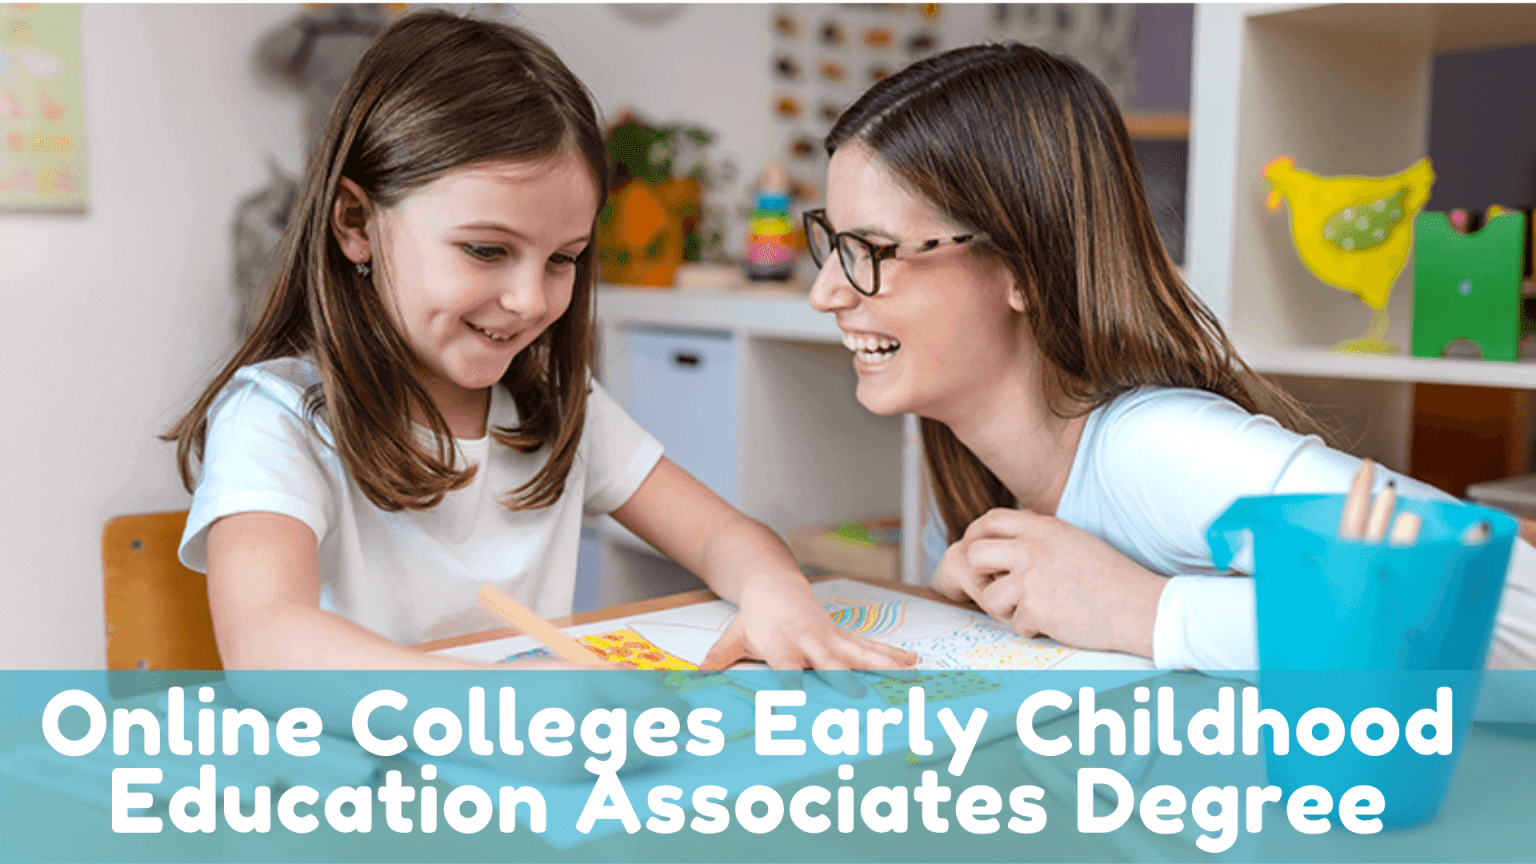 Pursuing An Online Colleges Early Childhood Education Associates Degree